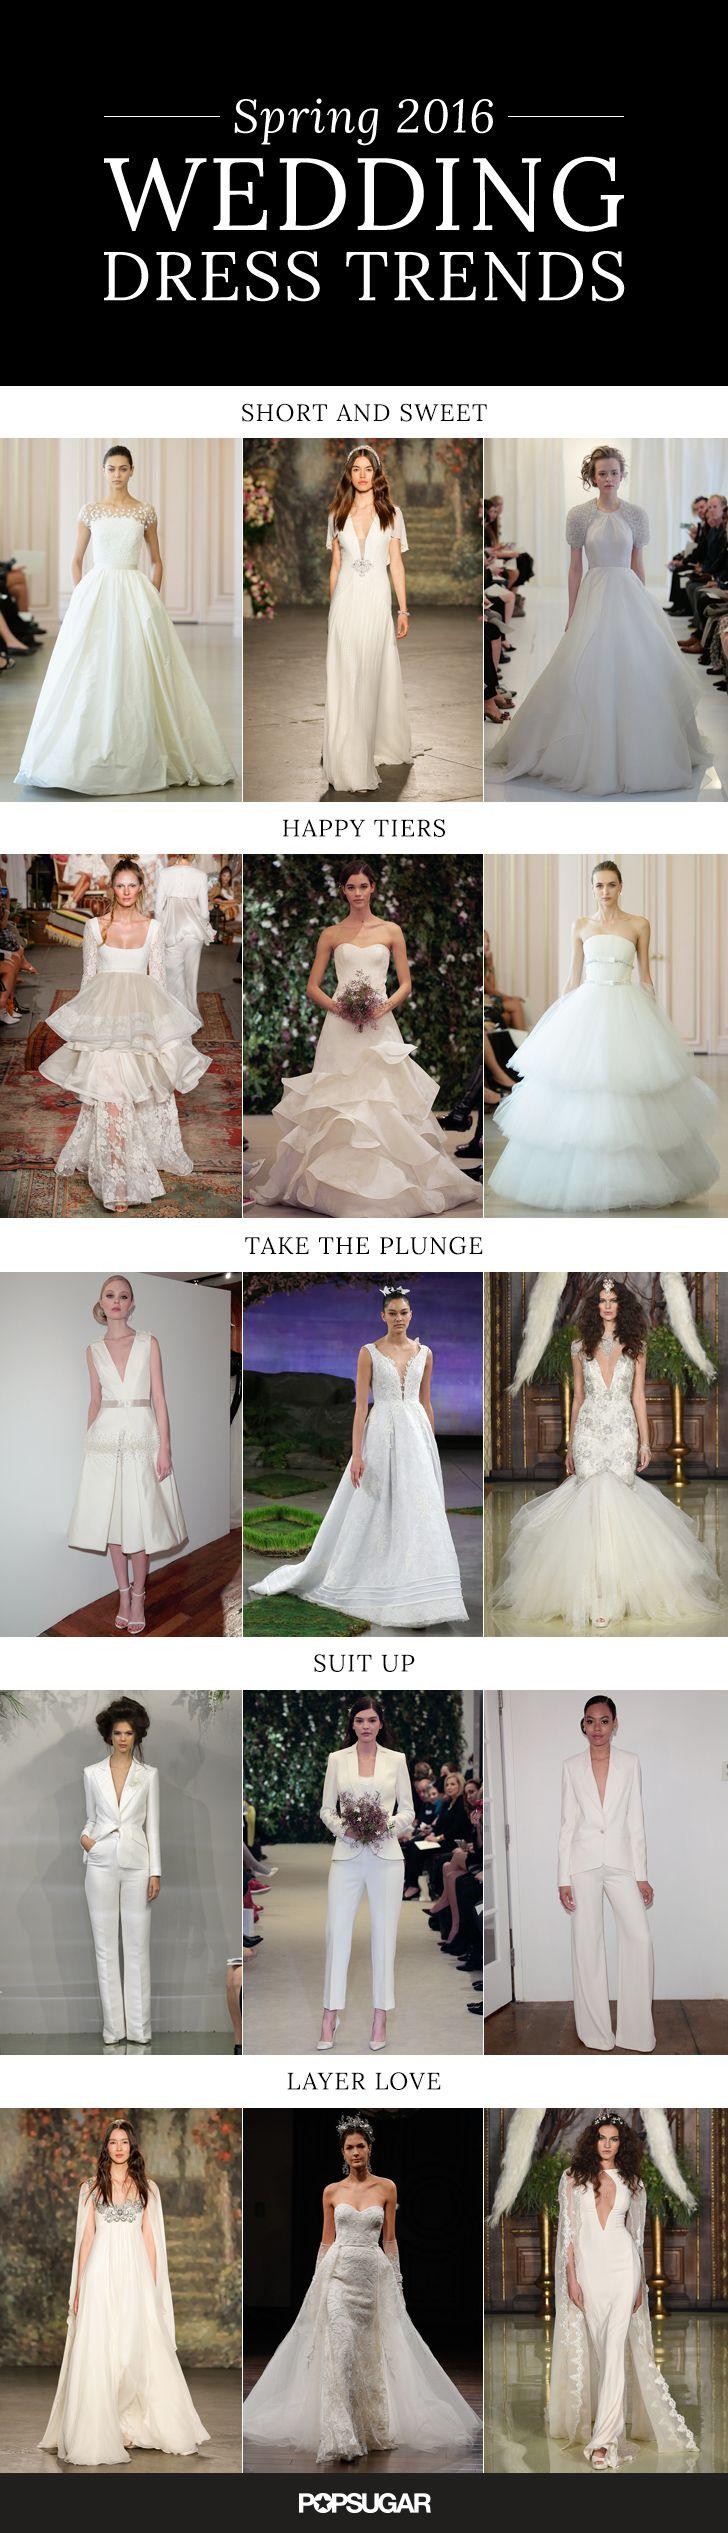 Wedding - 5 Bridal Trends To Know If You're Getting Married In 2016